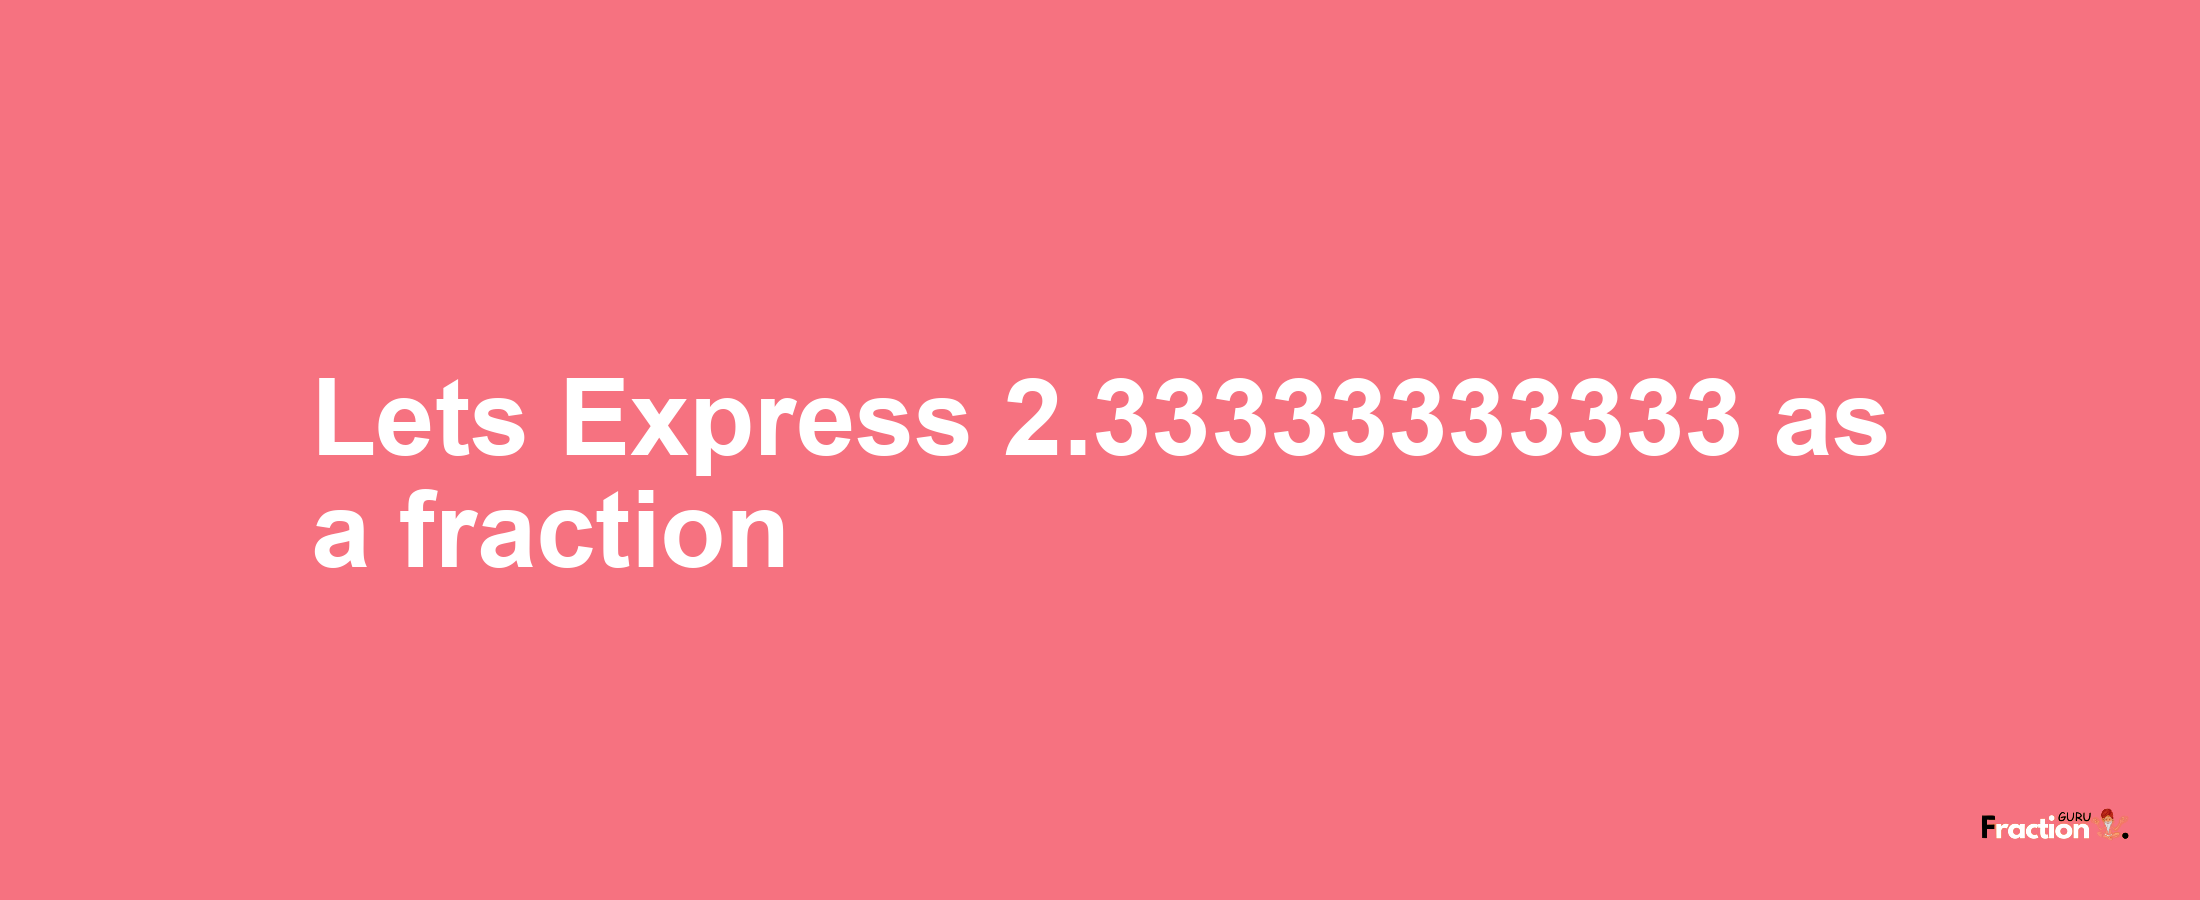 Lets Express 2.33333333333 as afraction